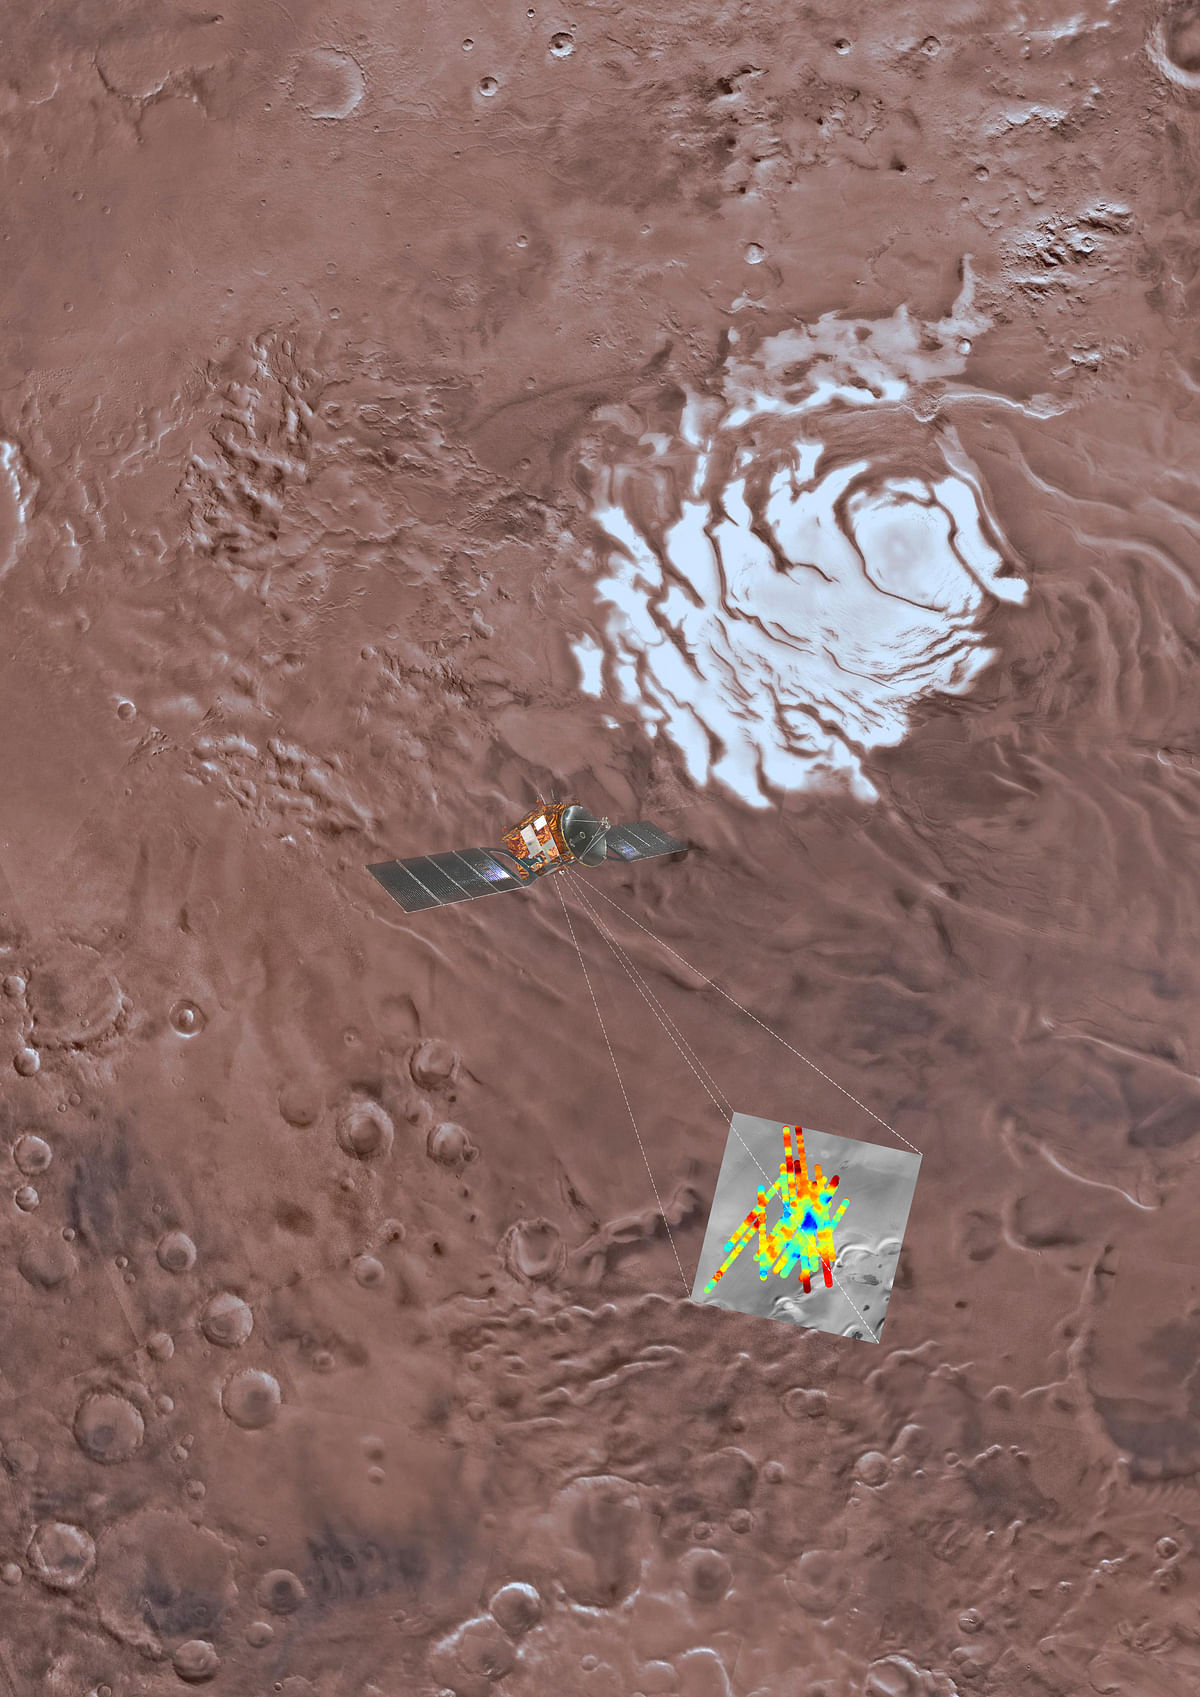 An artistic rendering shows the Mars Express Spacecraft probing Mars’ south pole. Scientists say they’ve detected water beneath the surface of Mars, raising the possibility of life on the planet.